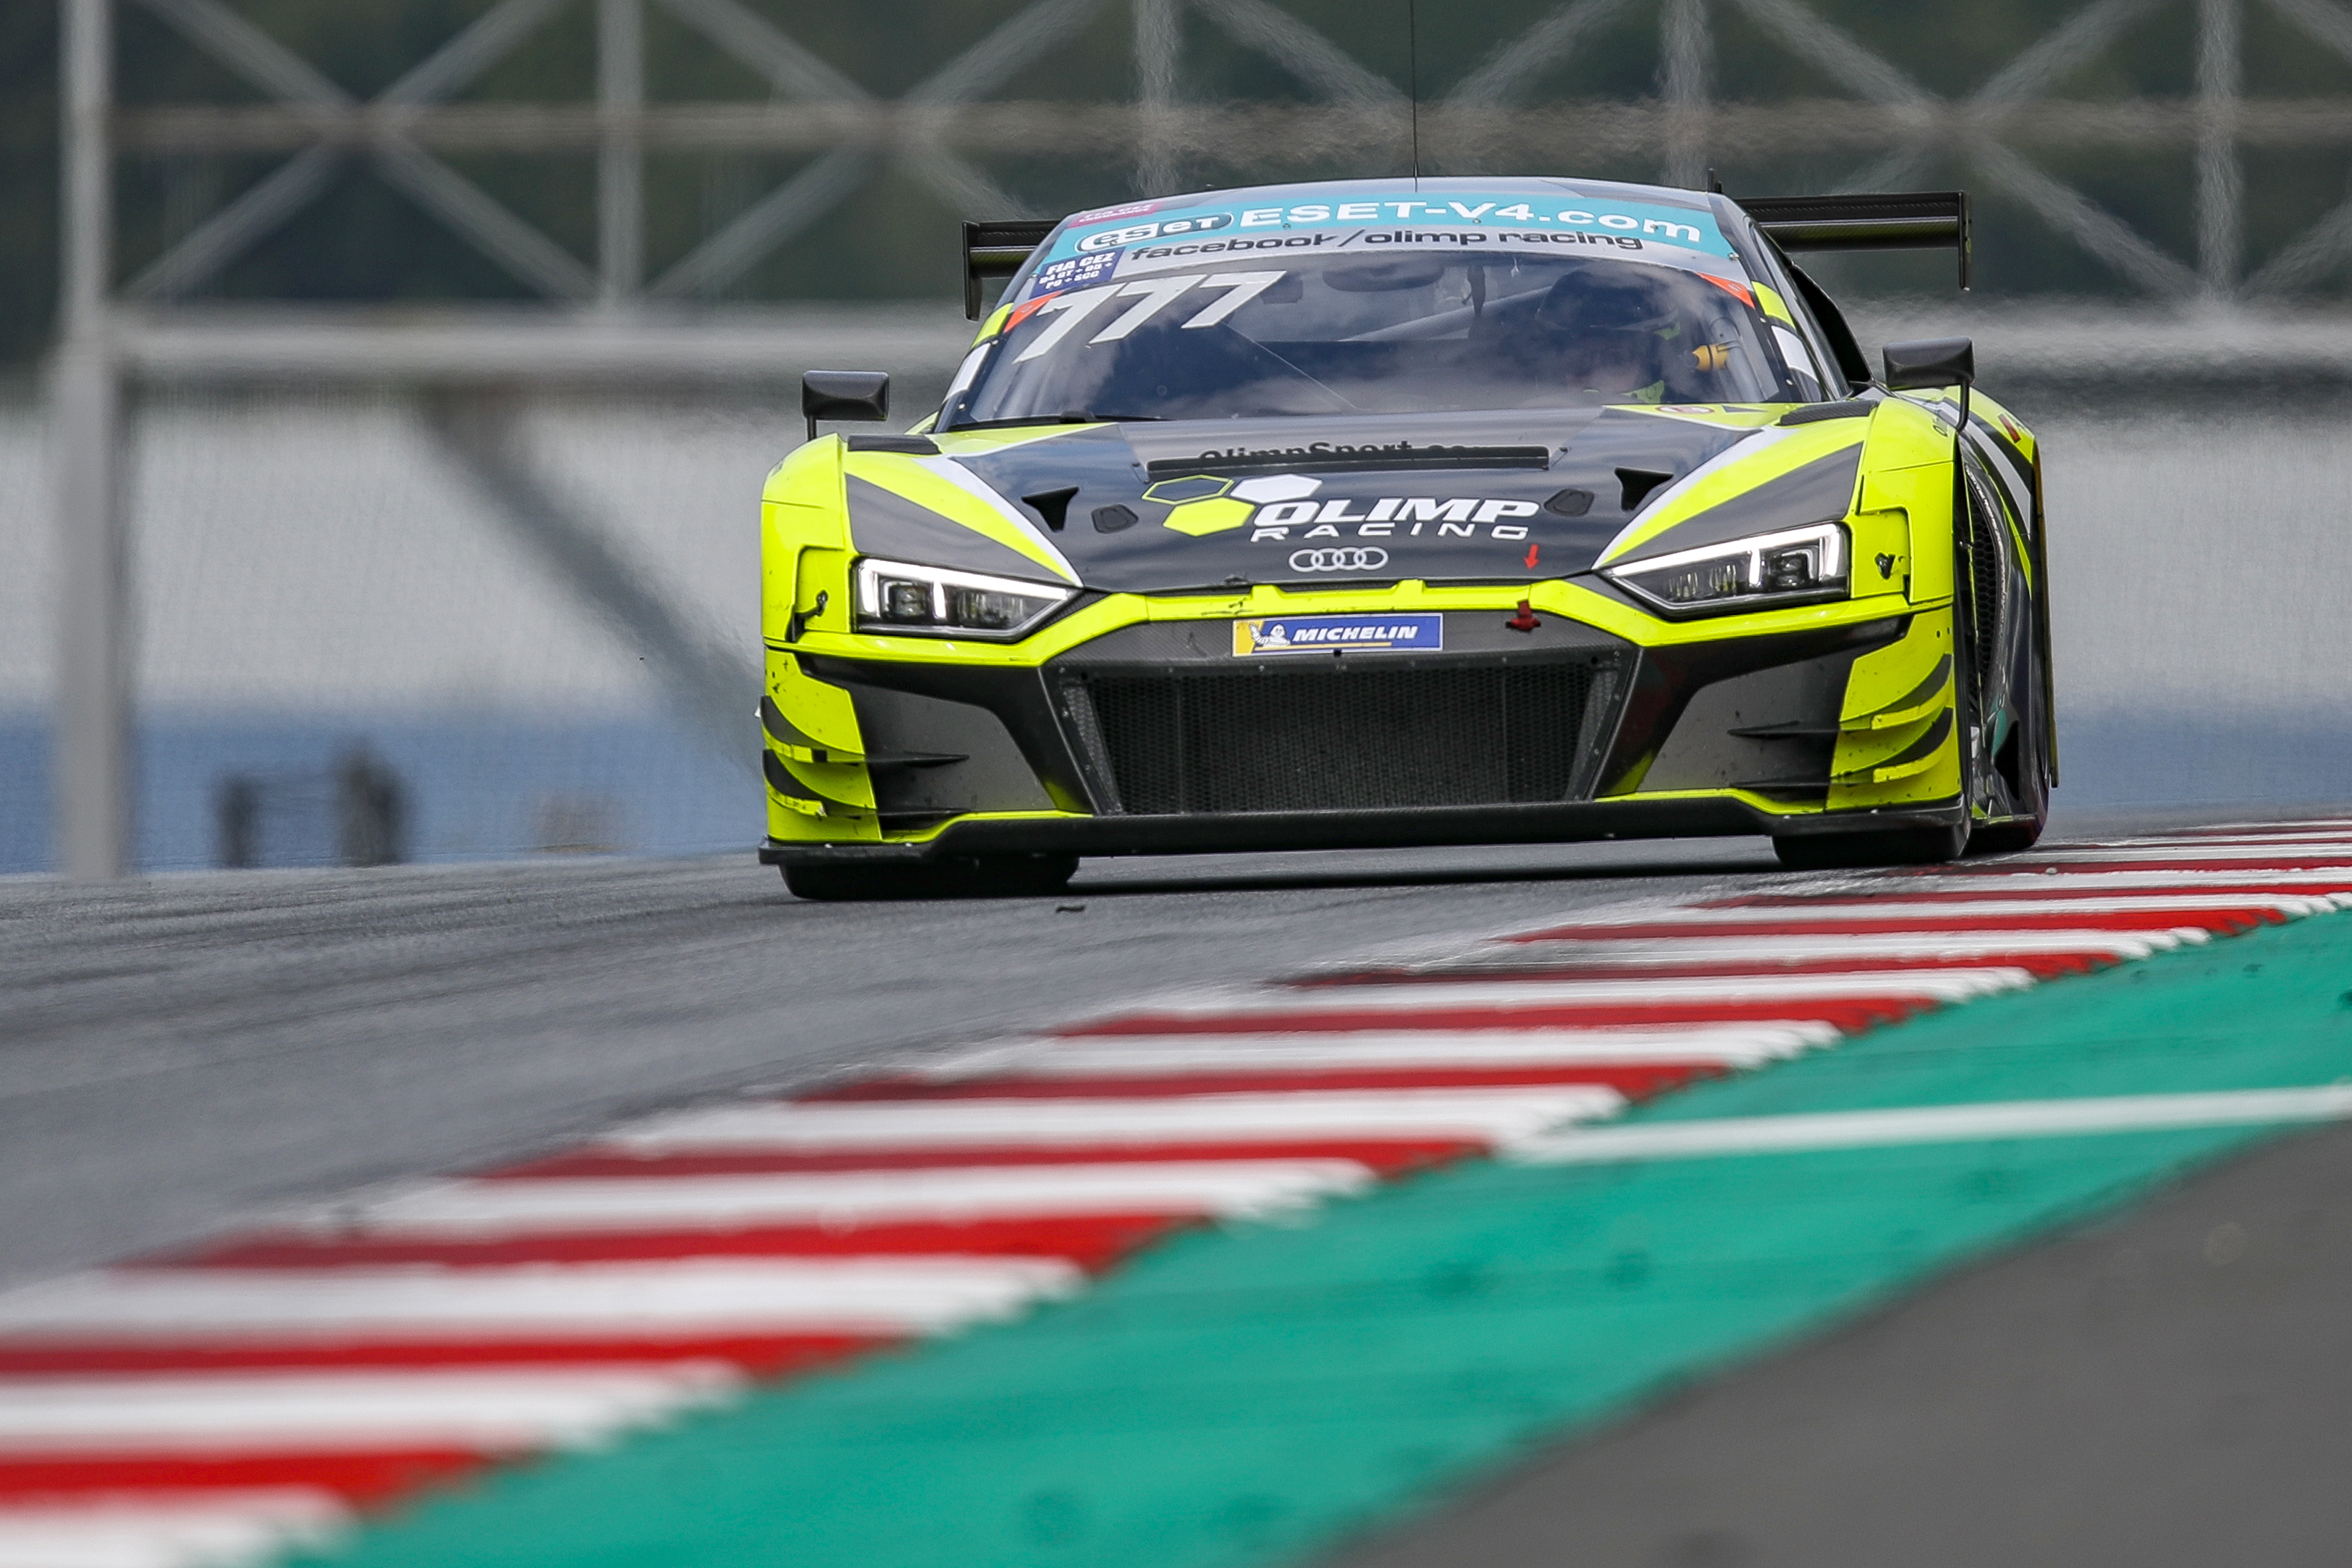 Two out of two for Mateusz Lisowski in GT race